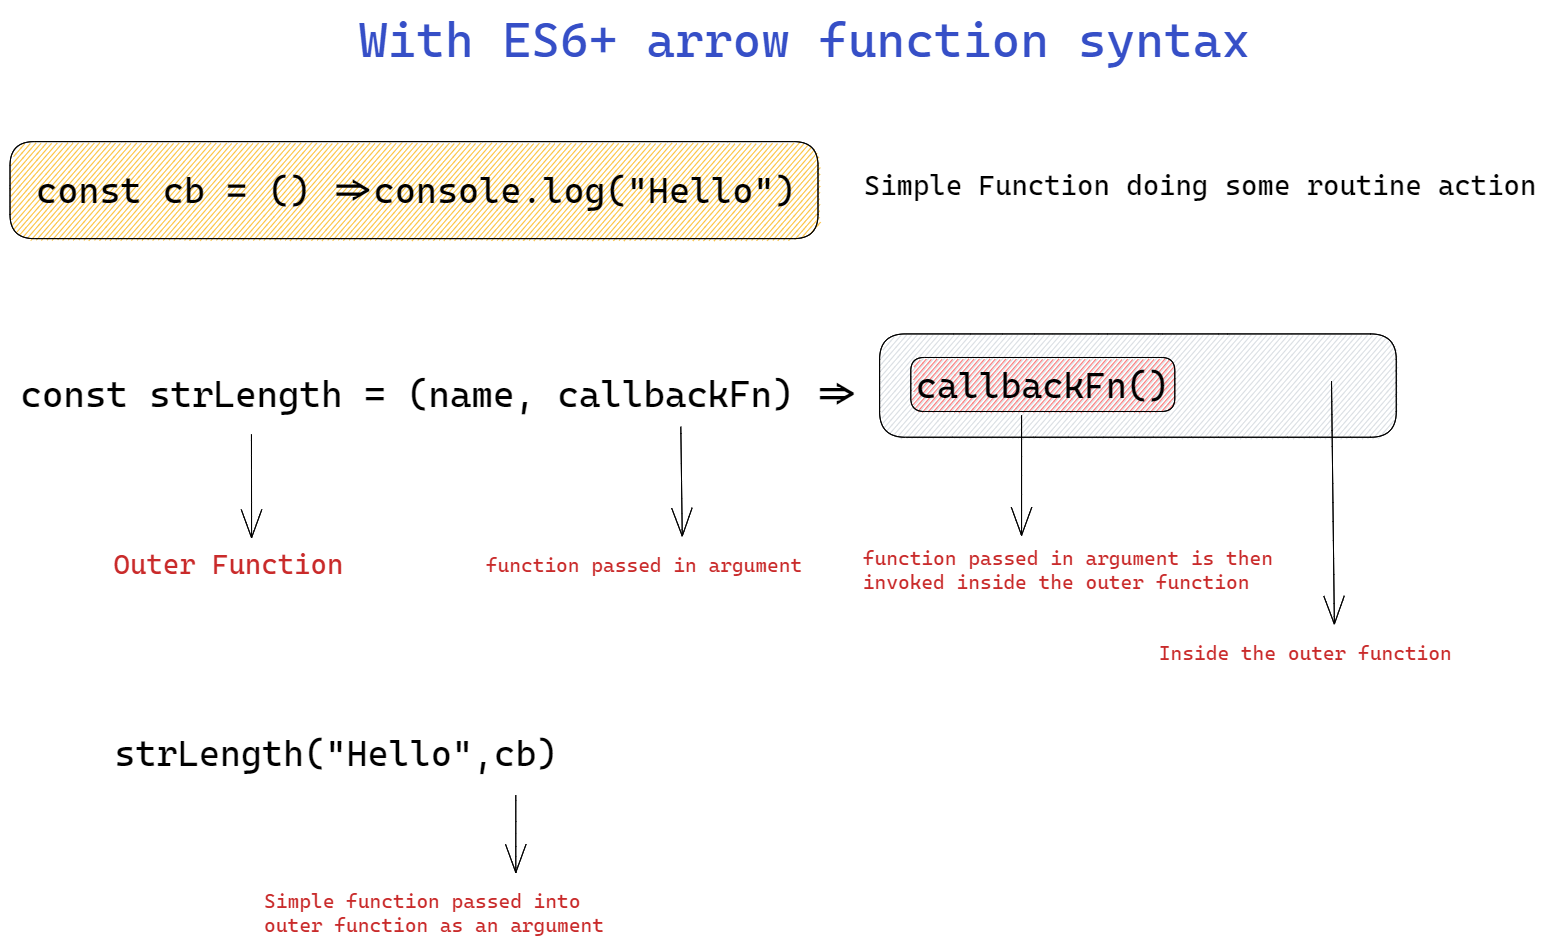 A diagram showing how callback functions are written with ES6+ syntax